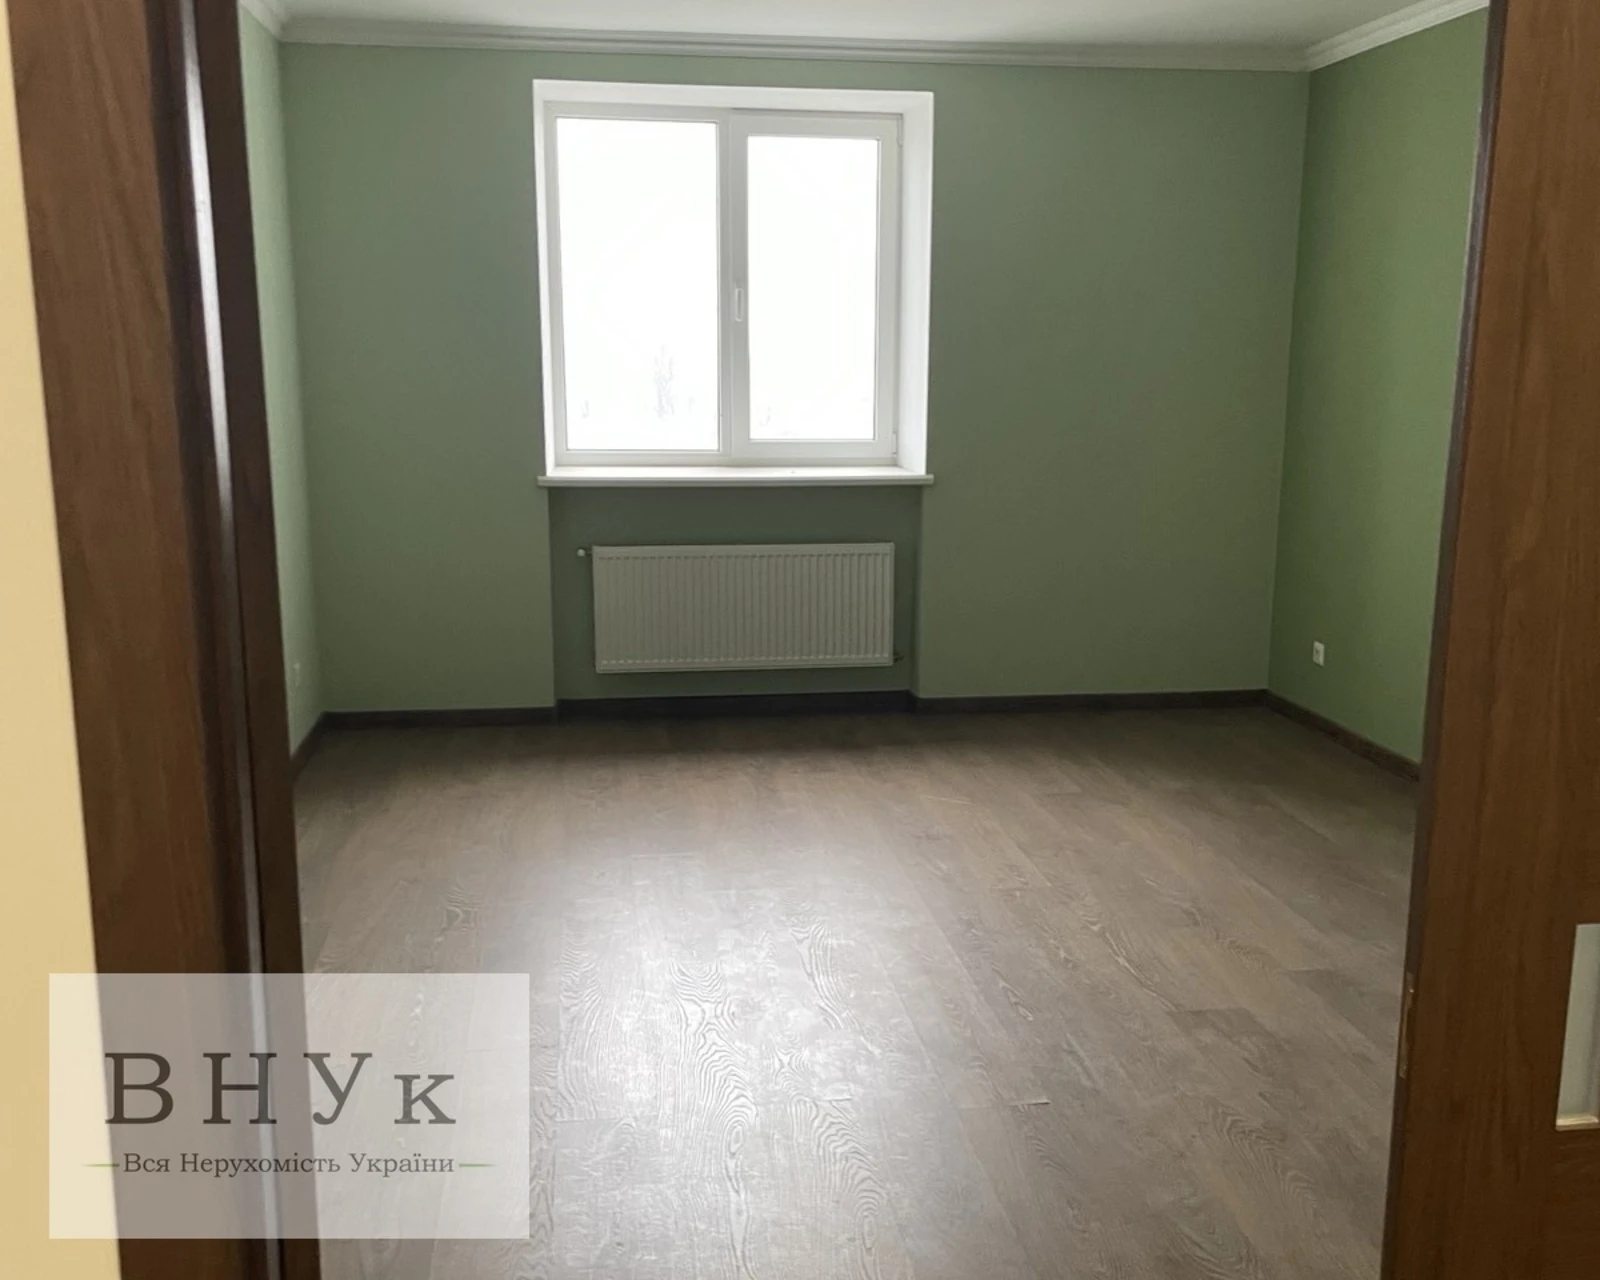 Apartments for sale. 2 rooms, 79 m², 4th floor/11 floors. Budnoho S. , Ternopil. 